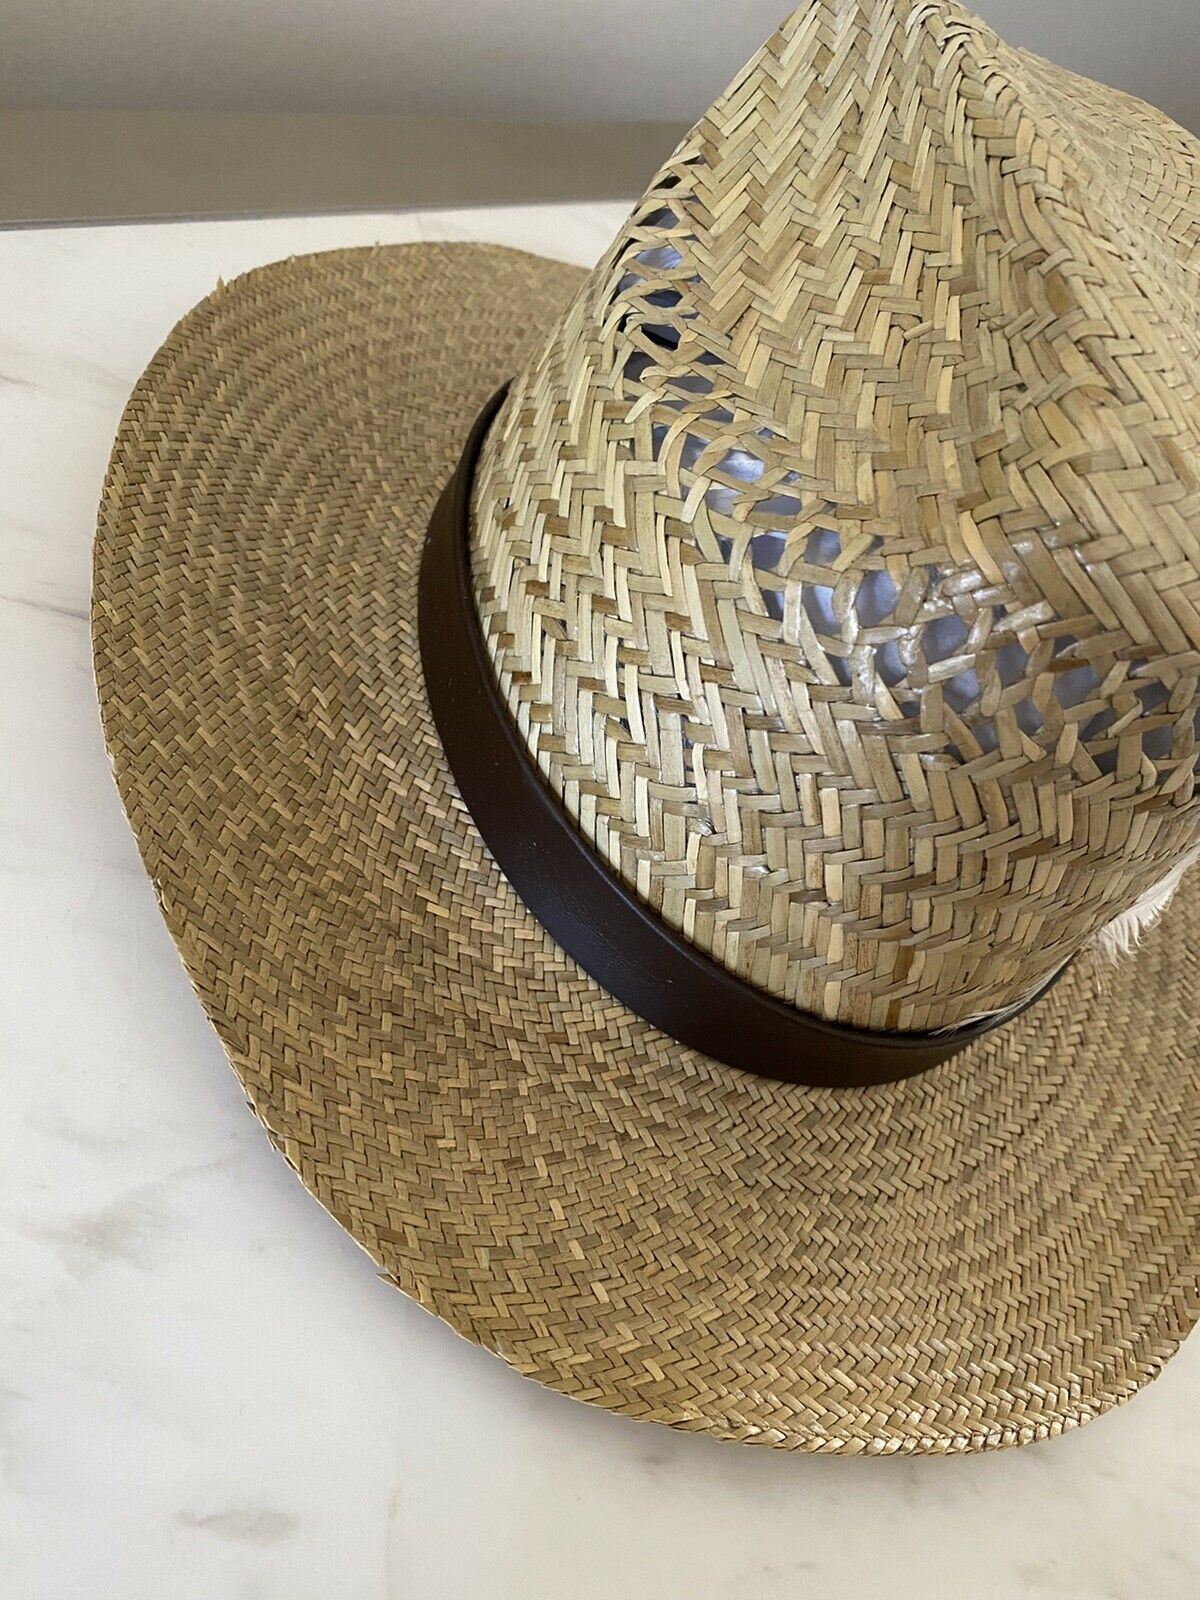 NWT $895 Saint Laurent Straw Cowboy Hat With Leather and Feathers Brown XL